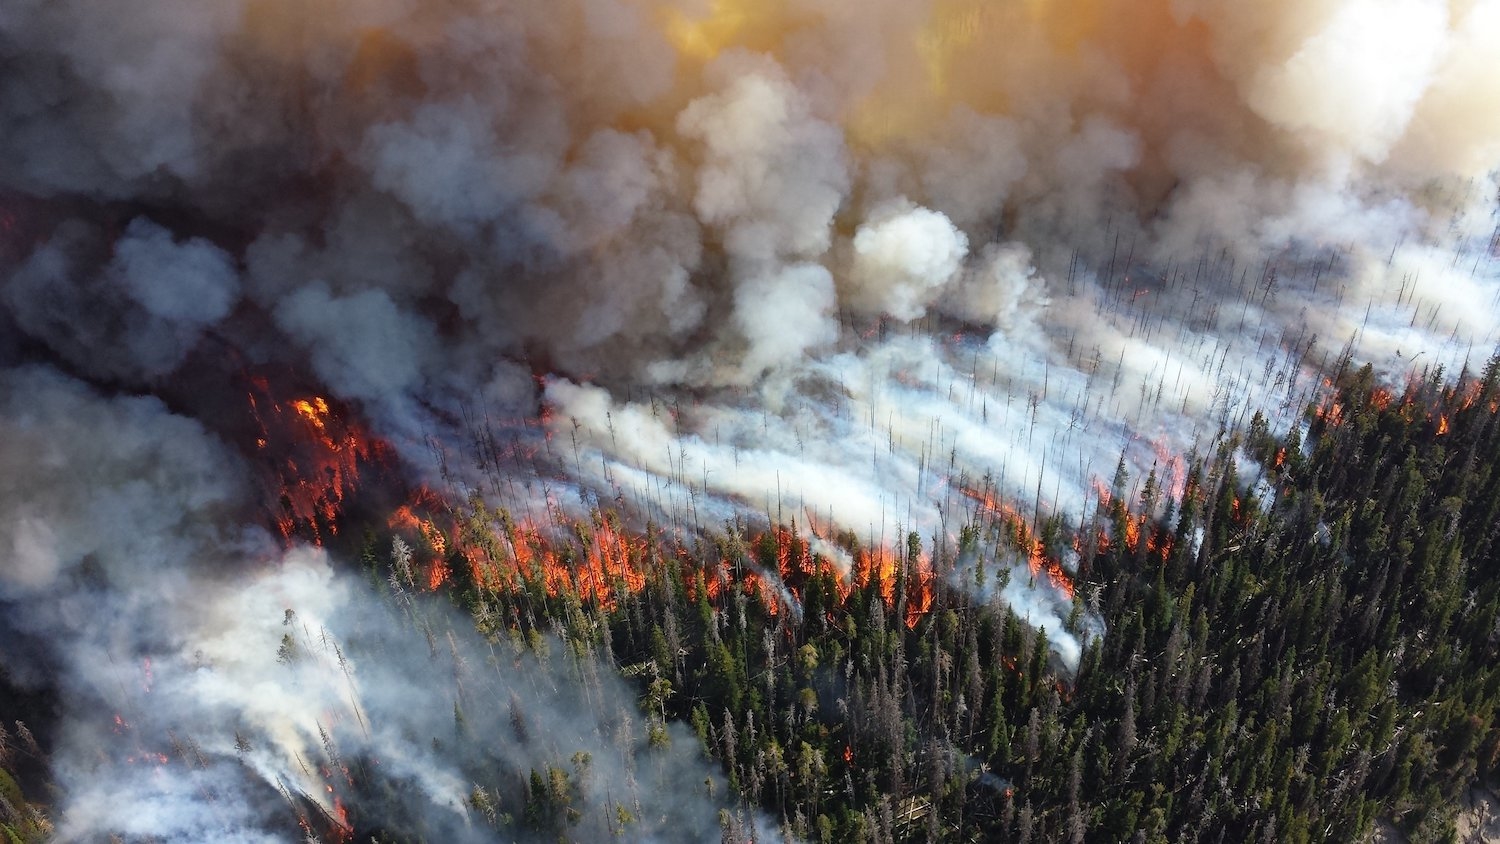 An image of a wildfire burning trees.